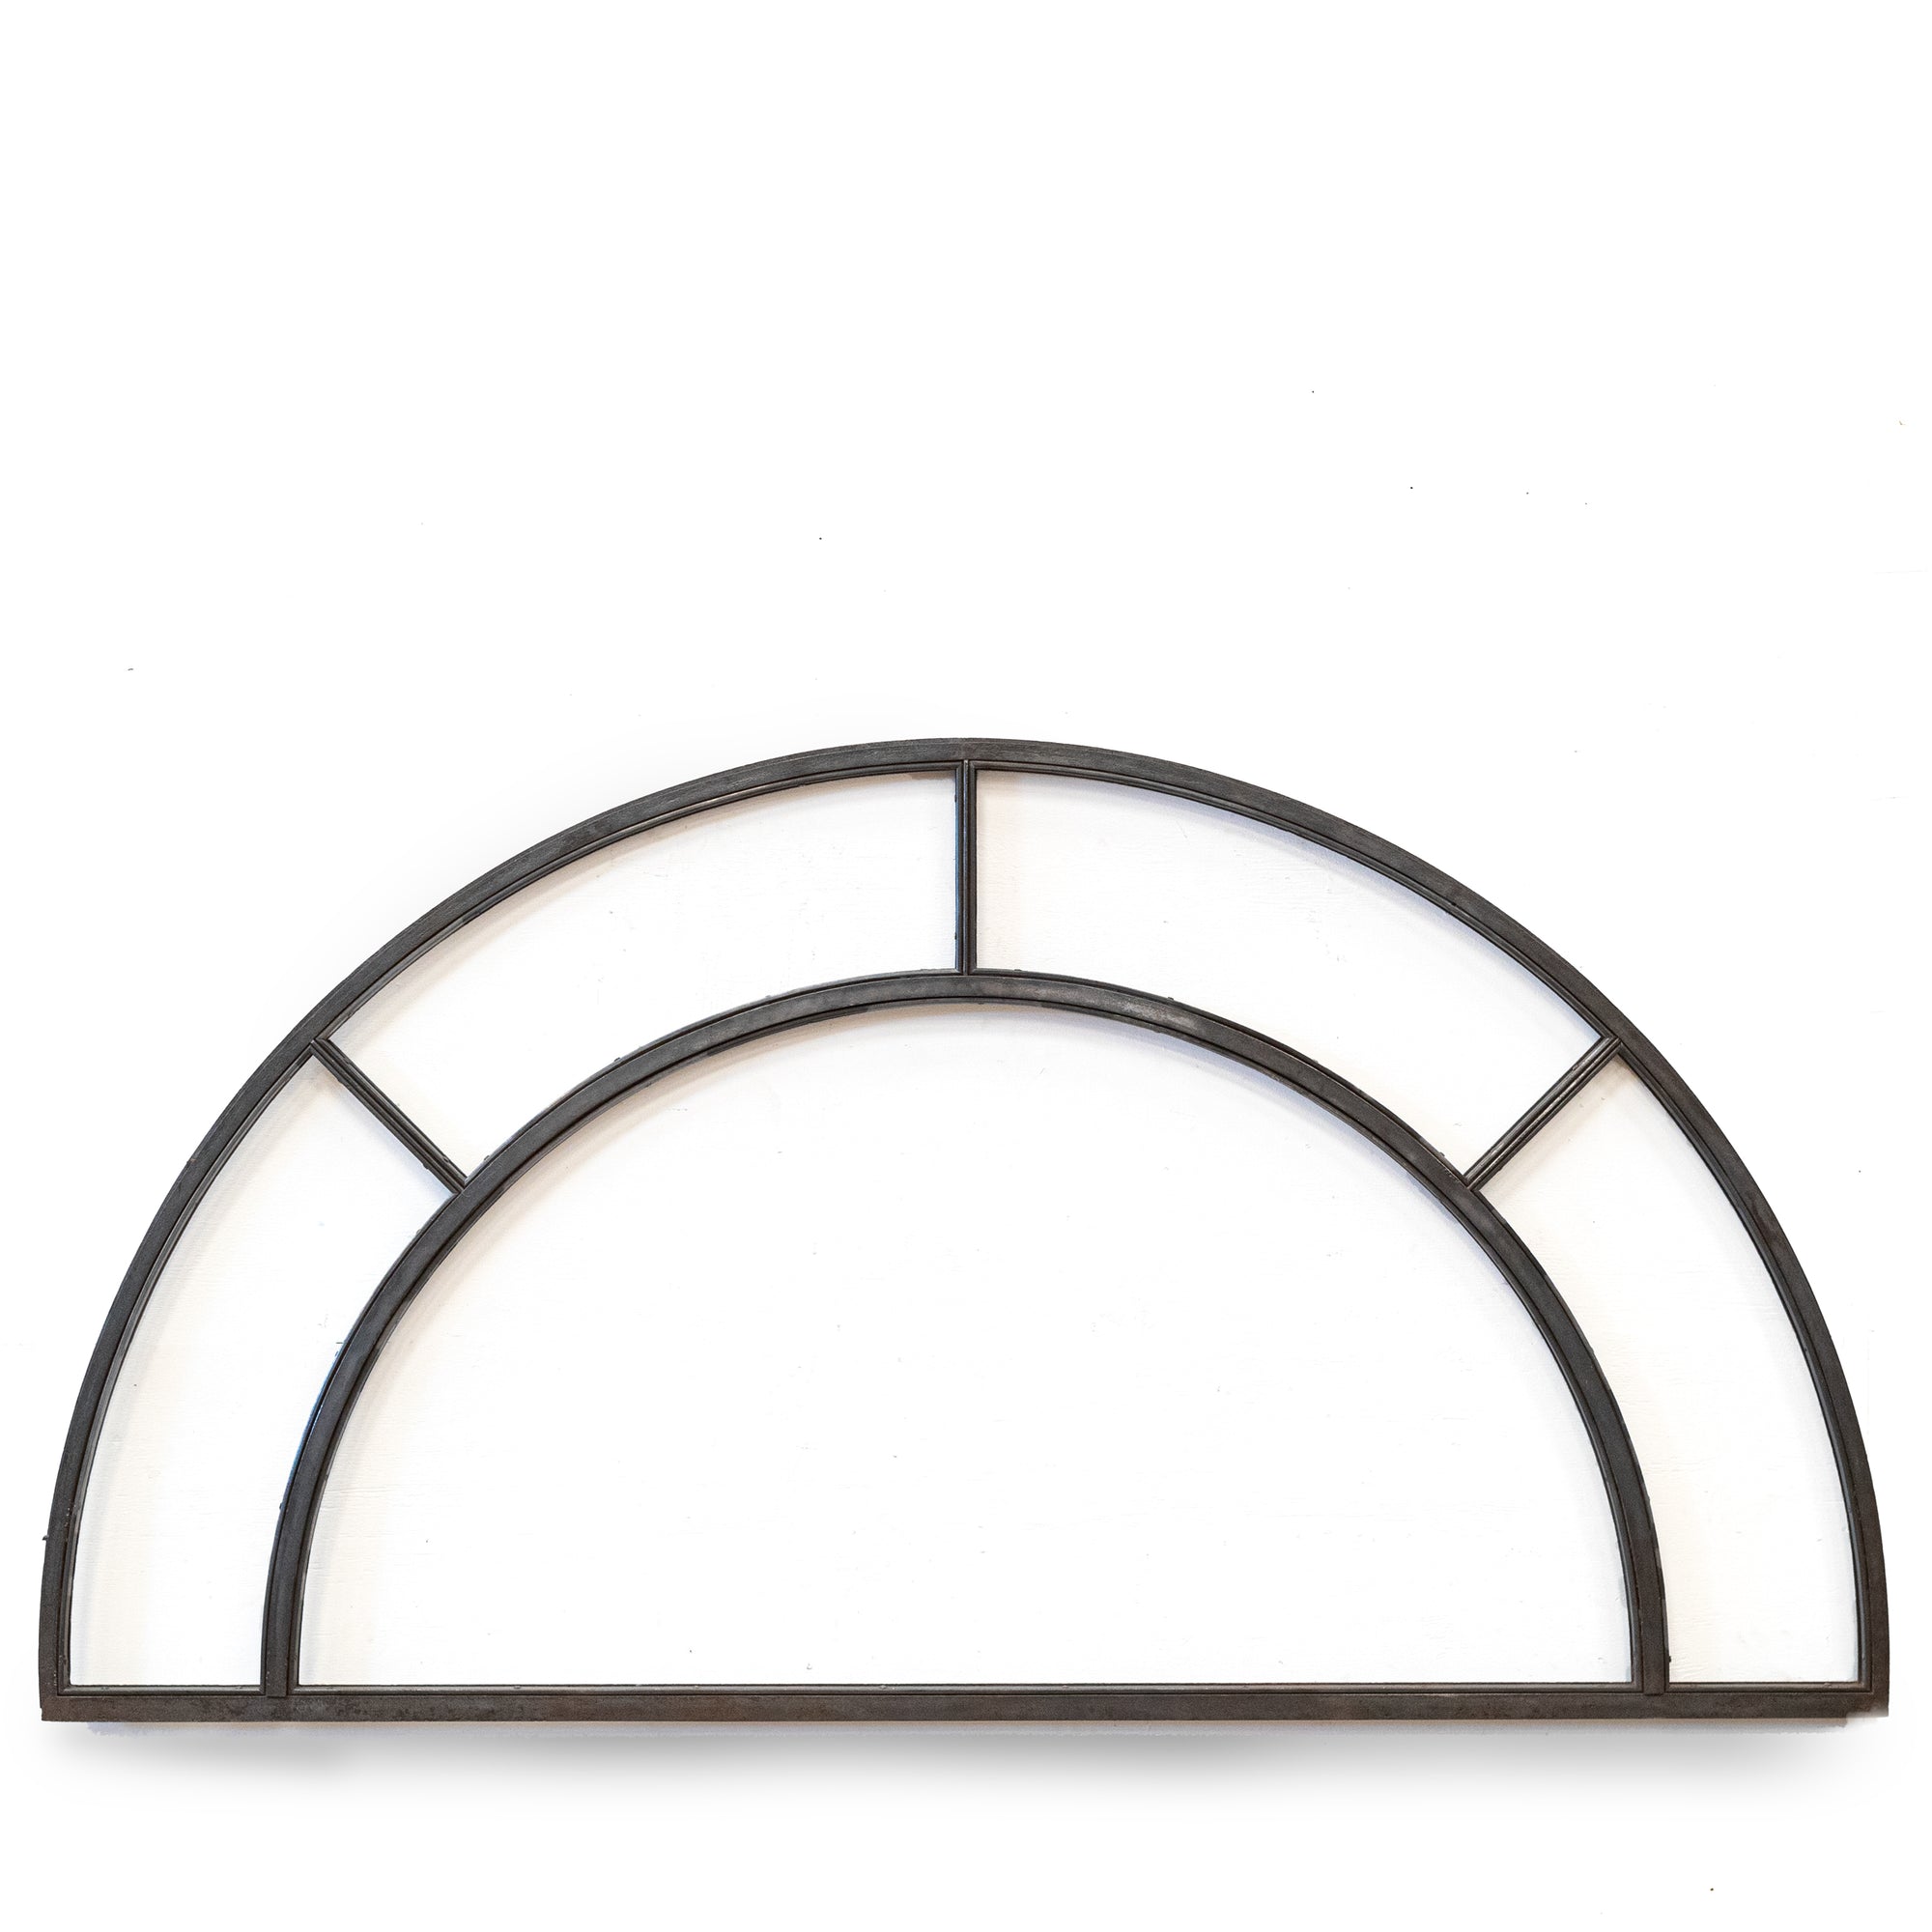 Large Antique Crittall Arched Fan Light | The Architectural Forum